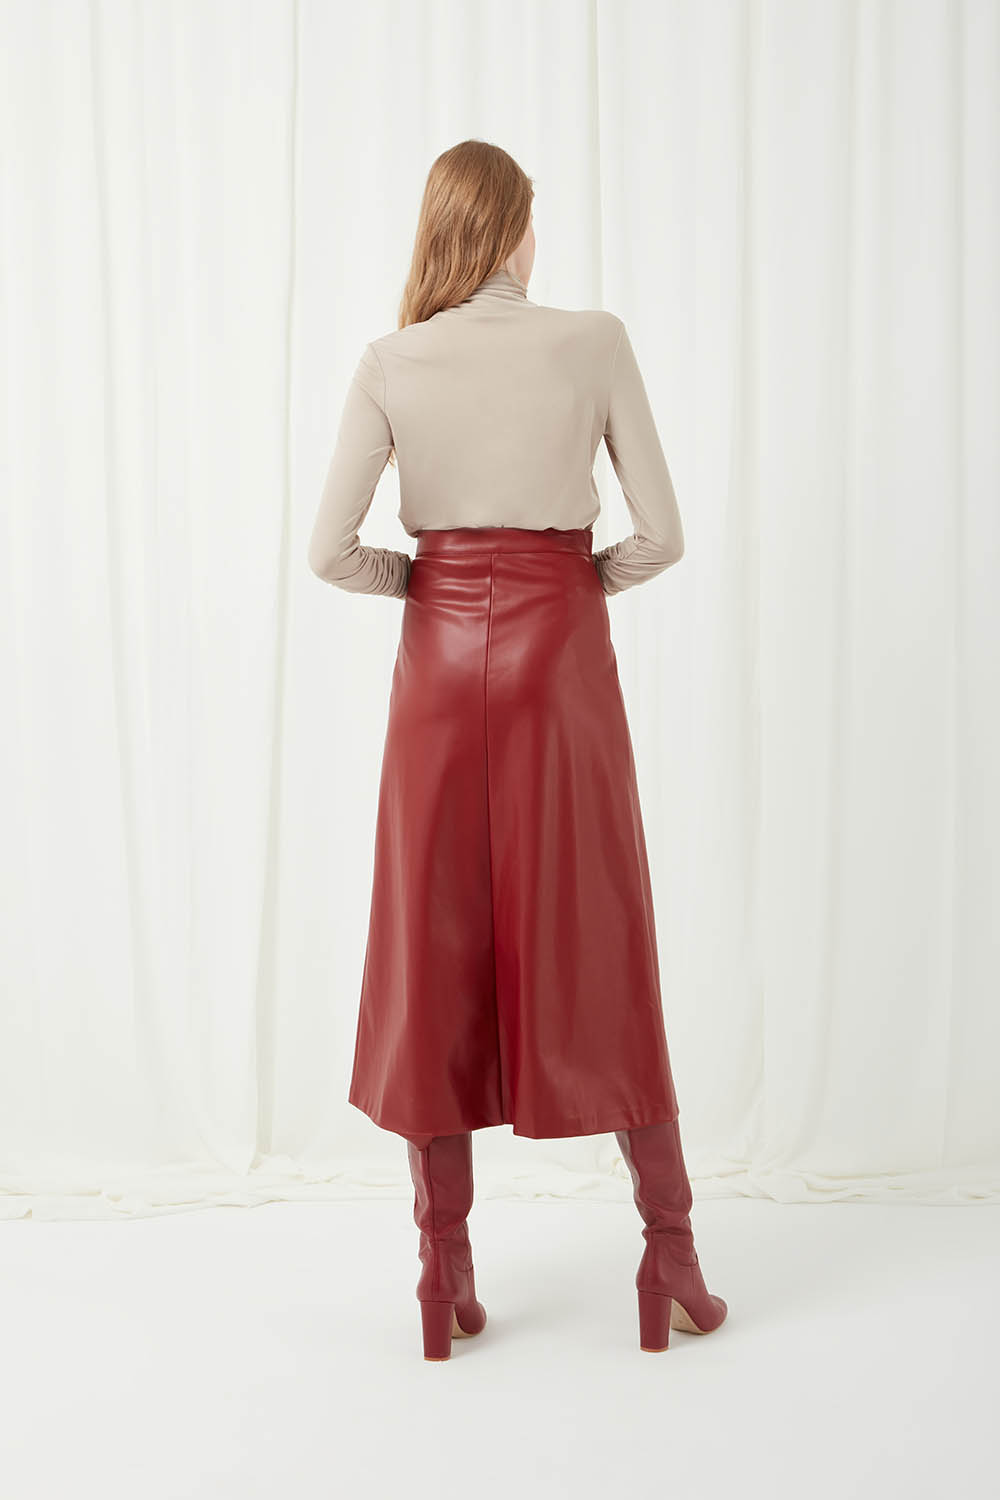 Faux Leather Burgundy Bell Skirt